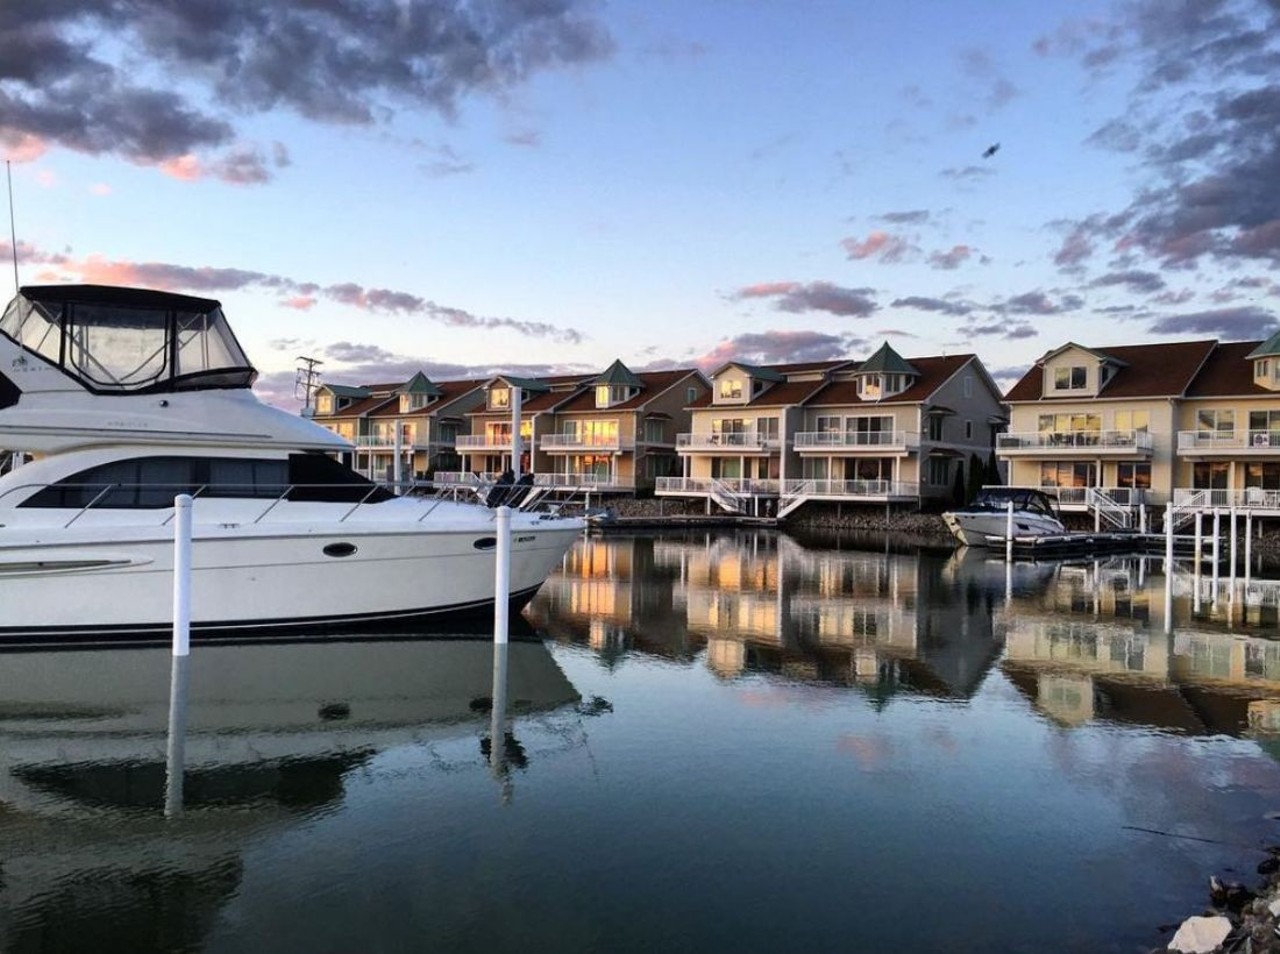 Gem Beach Marina
3000 N. Carolina St., Port Clinton, 419-797-4451
This marina is a great spot for boaters and for guests to enjoy the lakeside view, as well as the dozens of gorgeous lake houses. 
Photo via rfkay22/Instagram